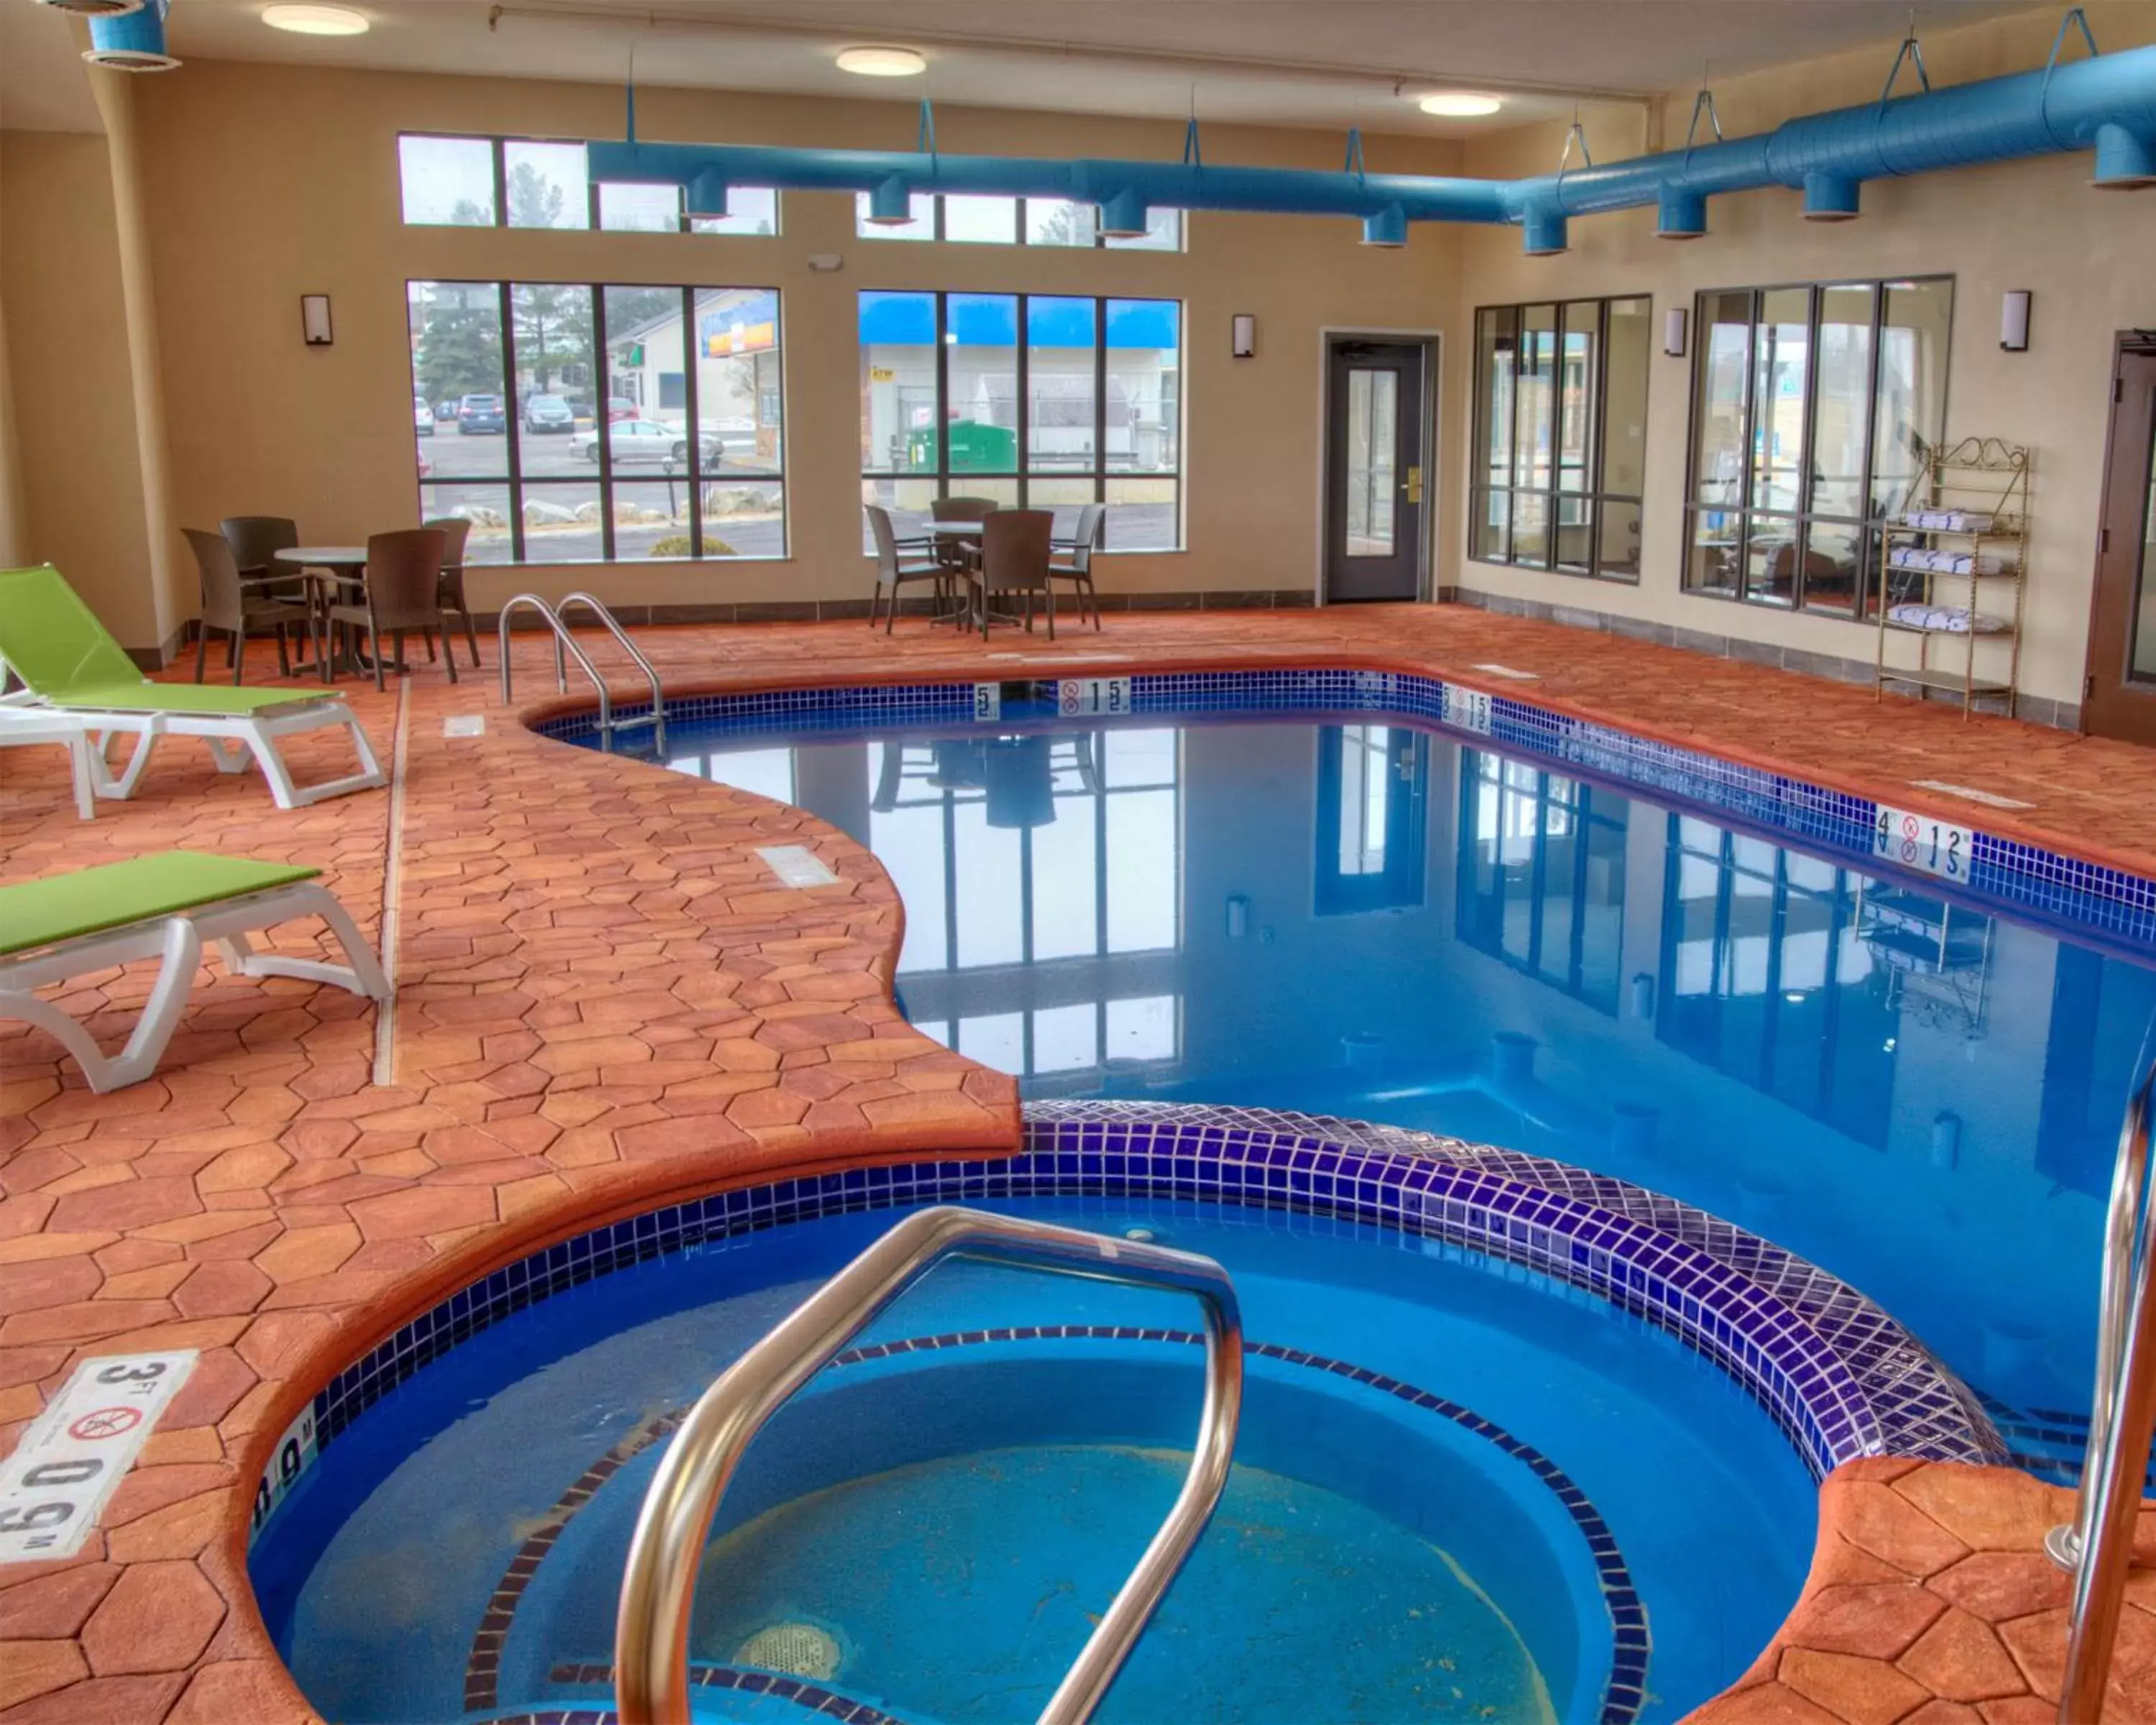 Day, Swimming Pool in Comfort Suites Plymouth near US-30